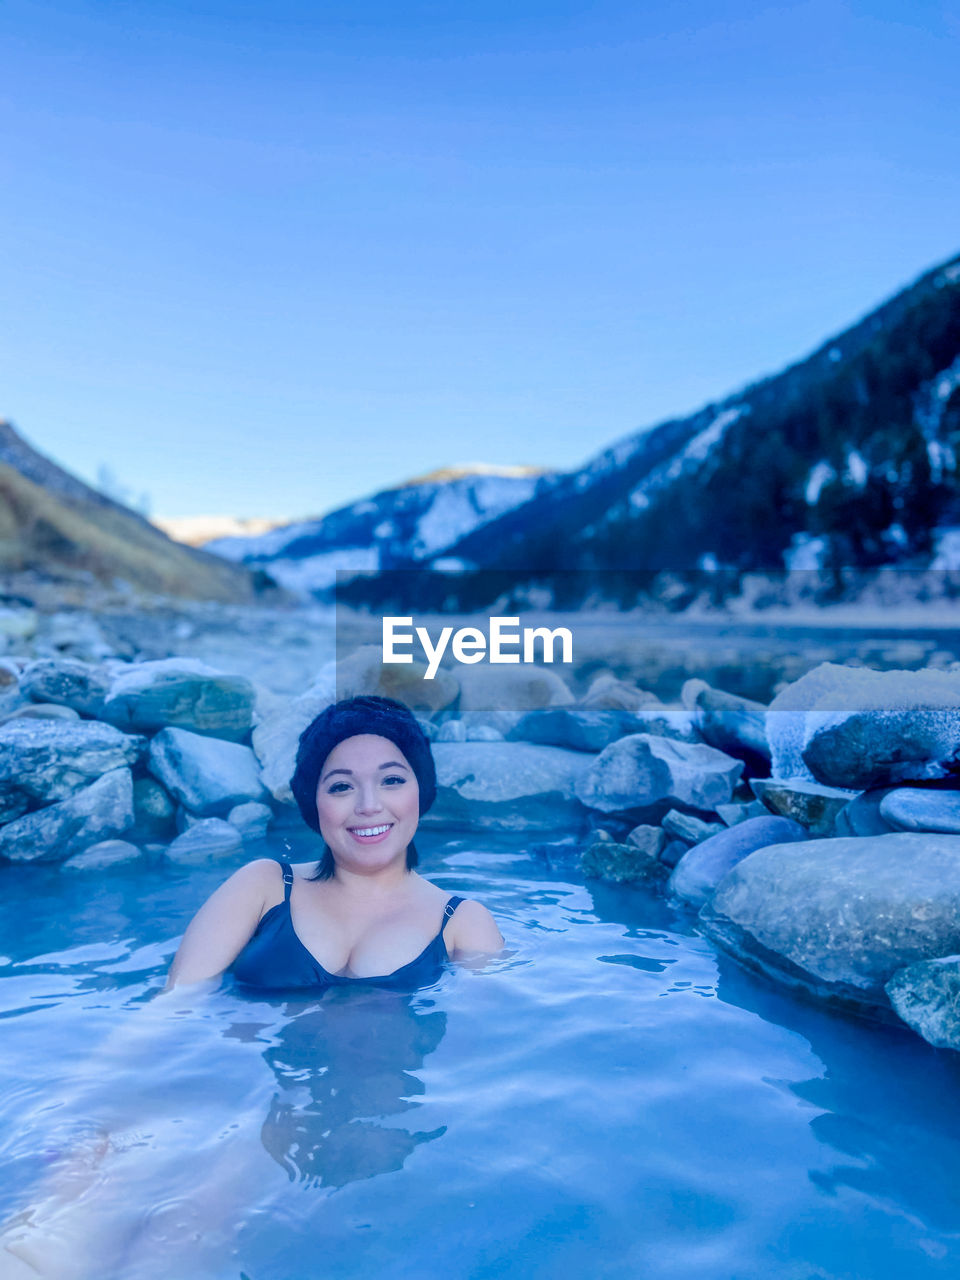 Natural hot springs in jackson hole